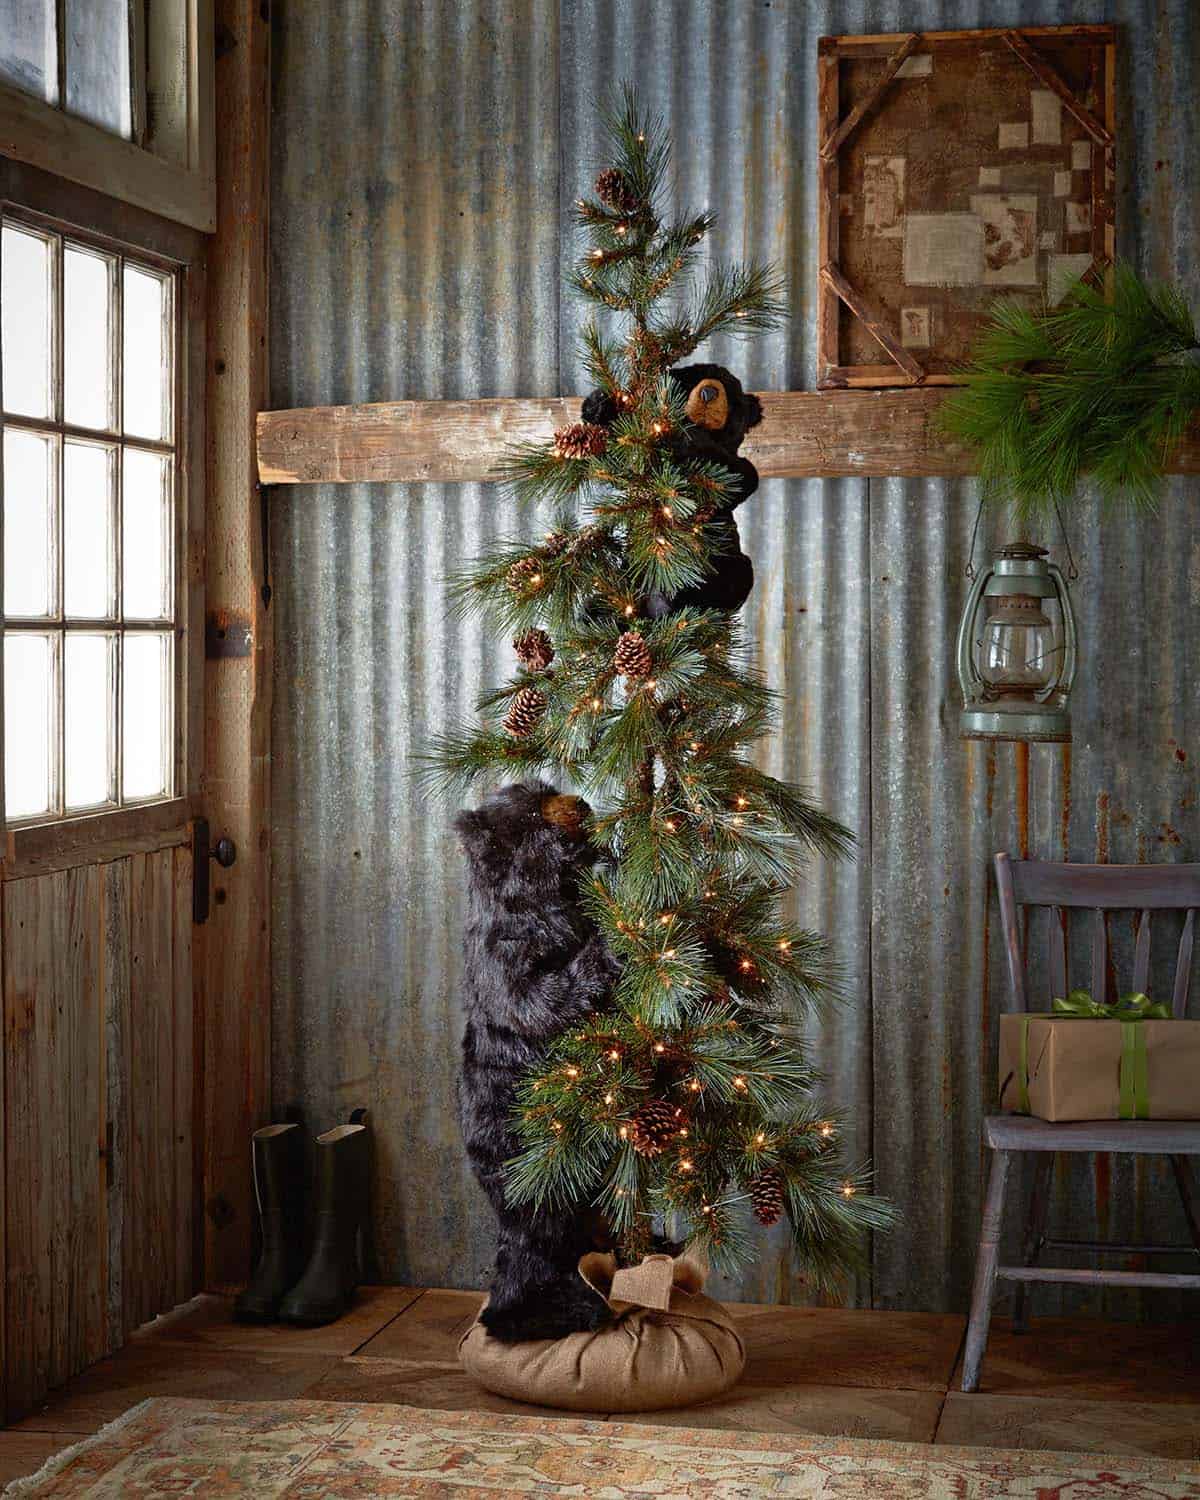 Rustic Country Give Your Home a New Festive Christmas with +90 Themes & Ideas - 8